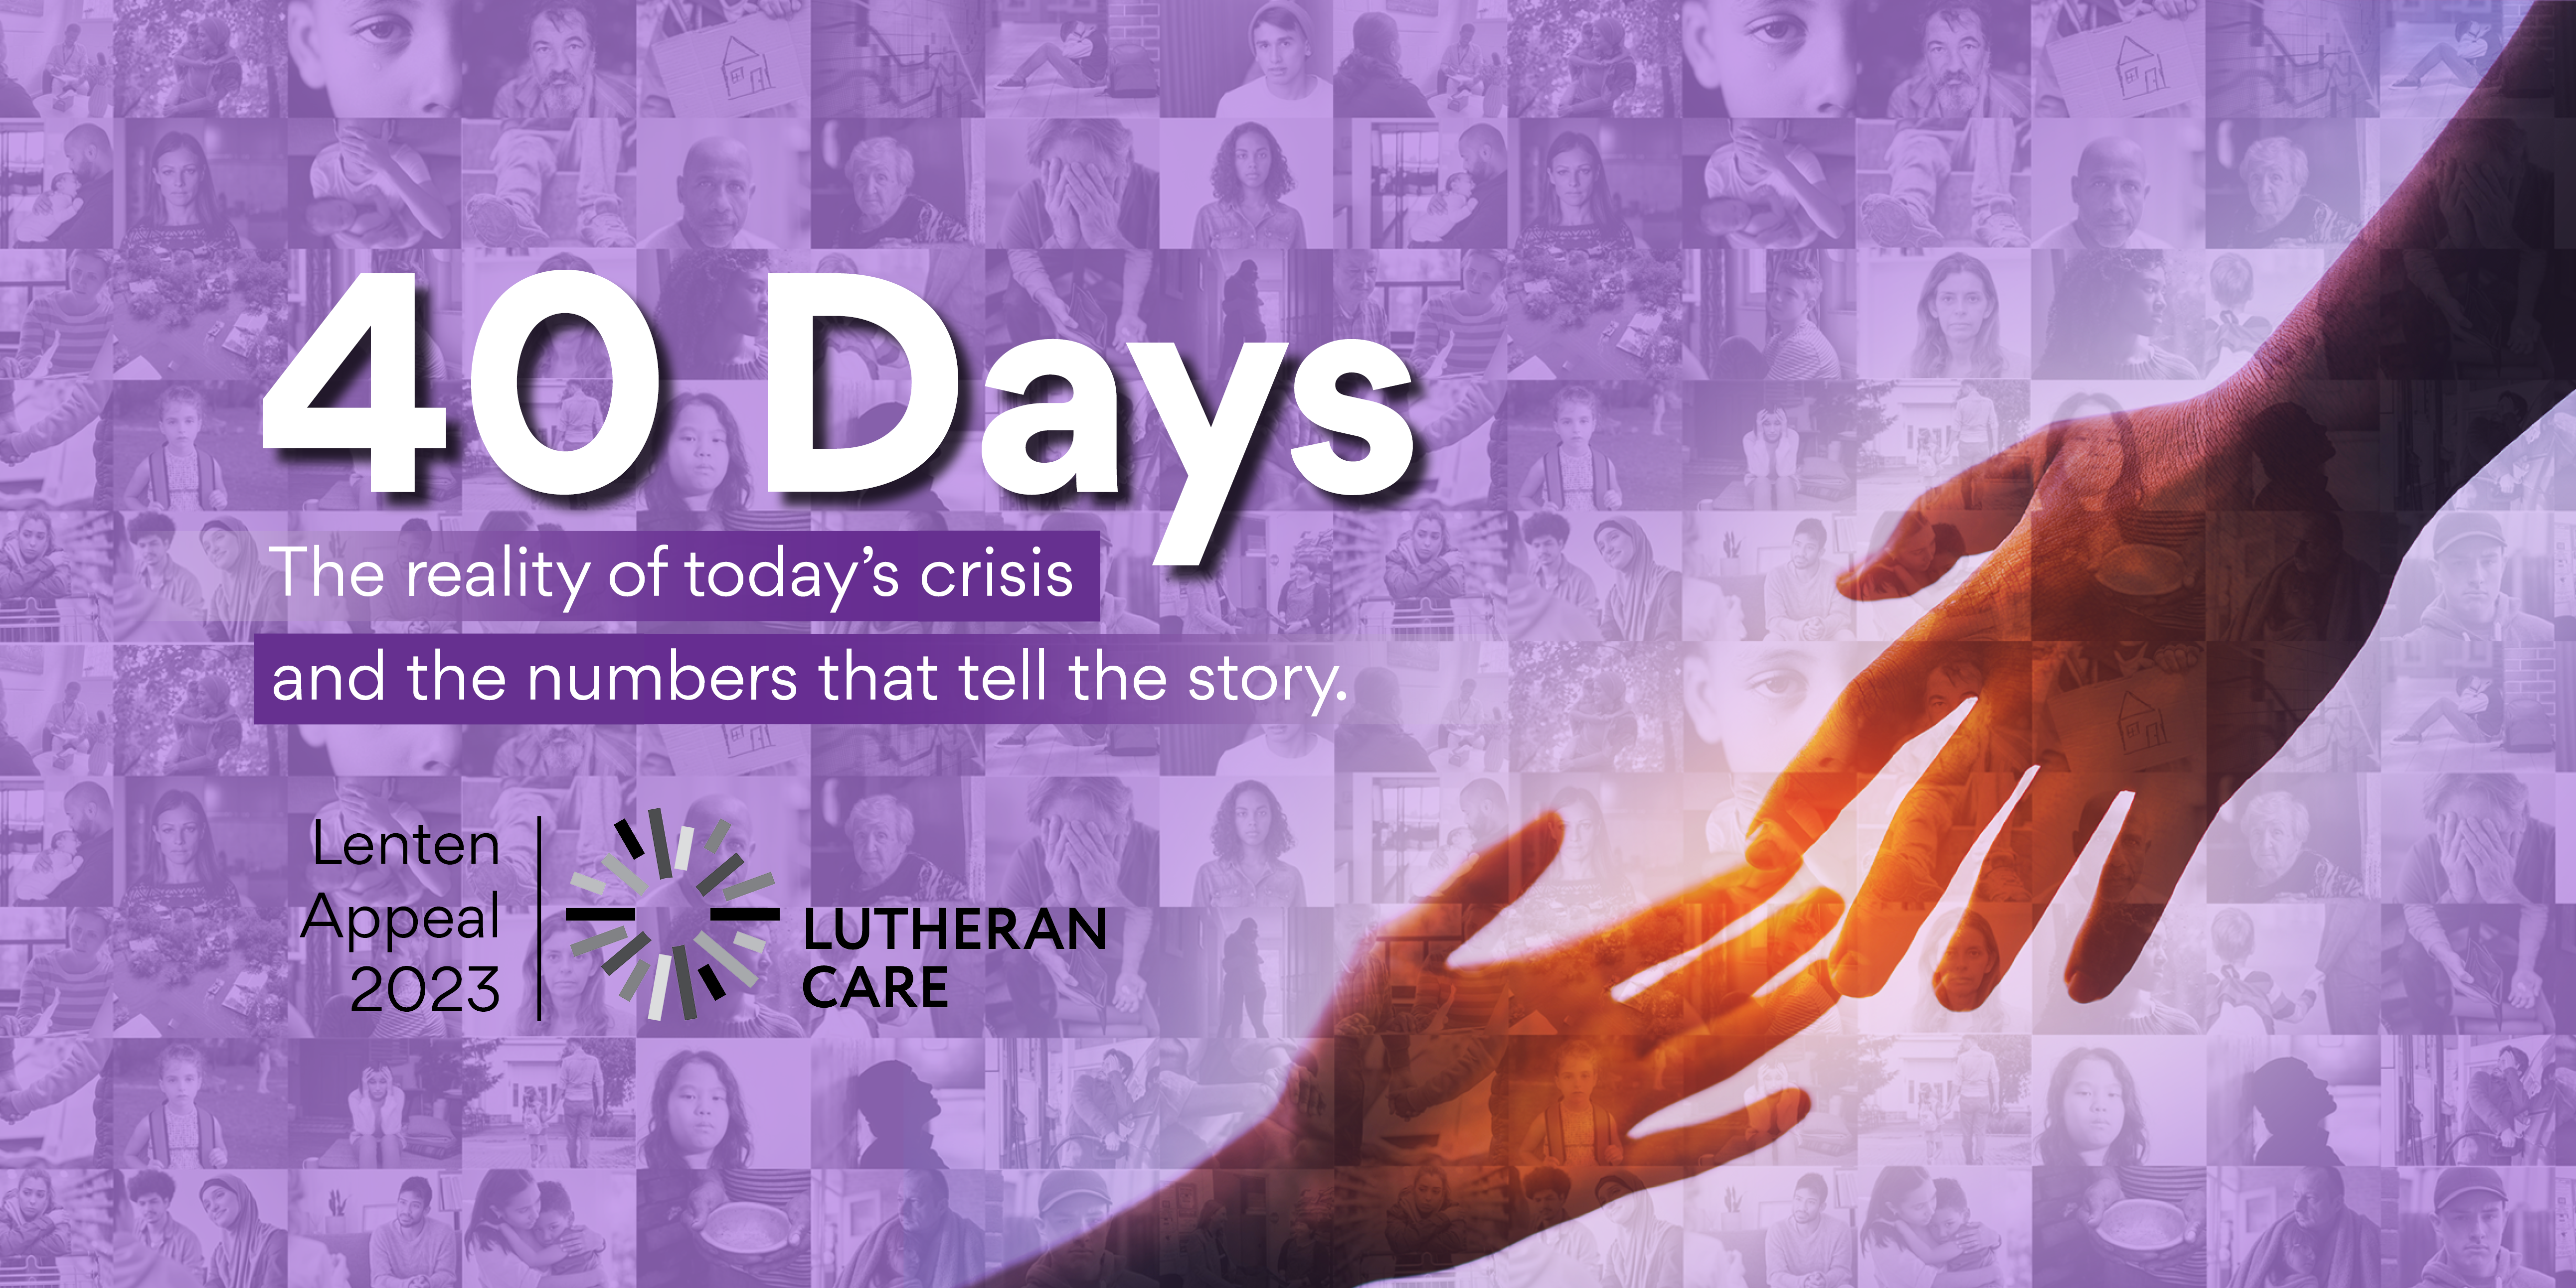 Image of 40 different faces with purple overlay and two hands reaching for each other at the front of the image. Text reads 40 Days the reality of today's crisis and the numbers that tell the story.